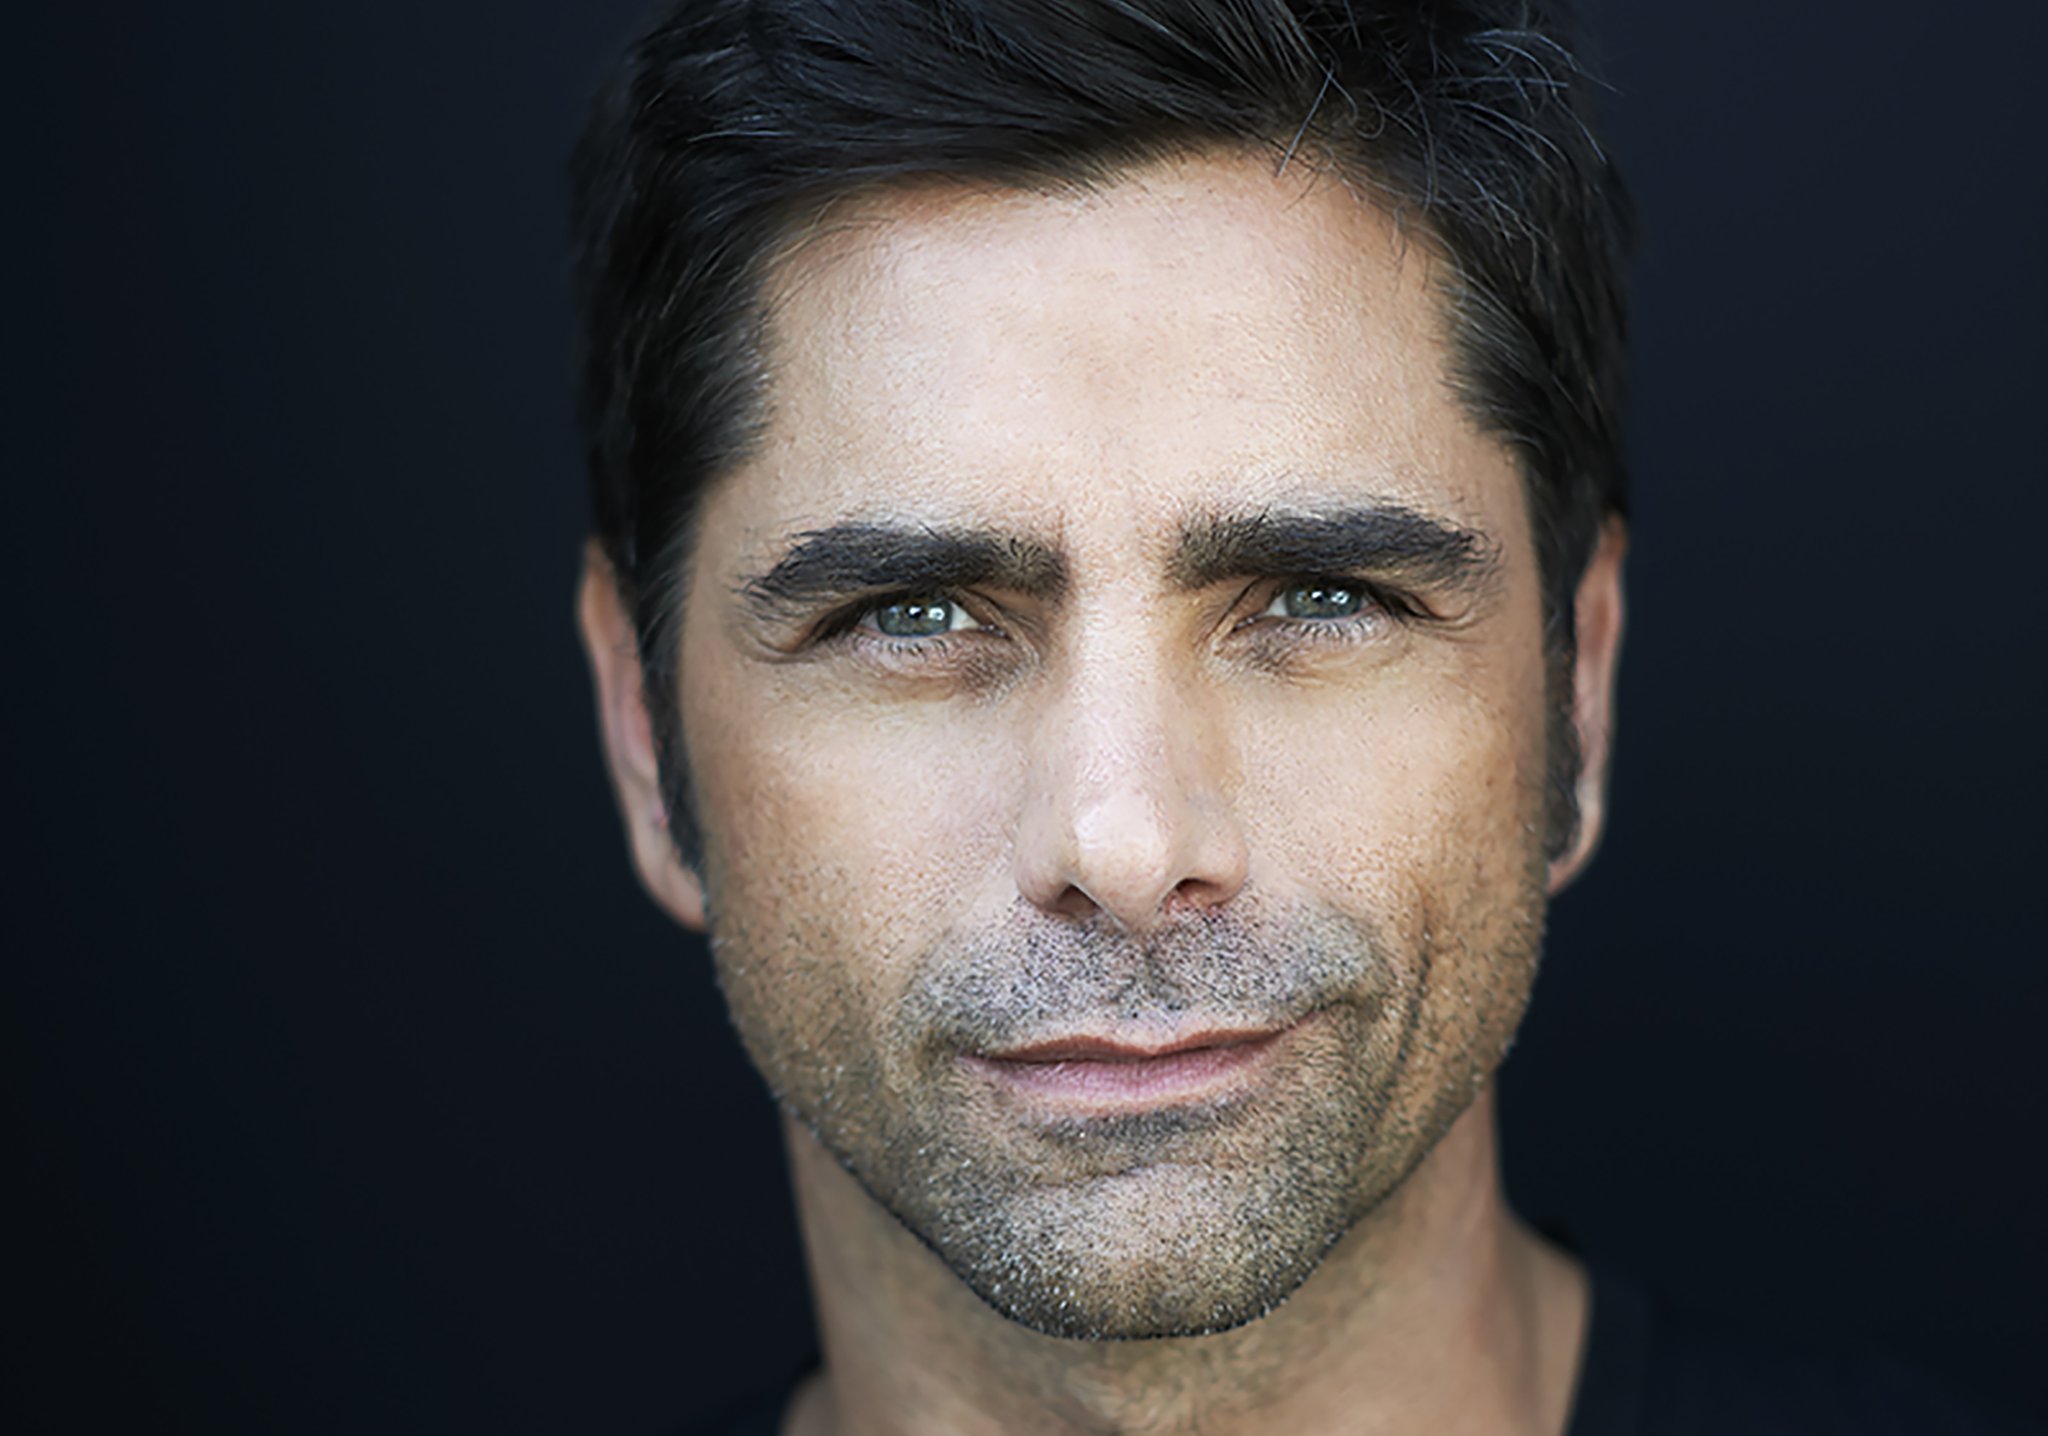 Happy birthday to everyone\s favorite Uncle Jesse, John Stamos!!

Which is your favorite role of the actor/musician? 